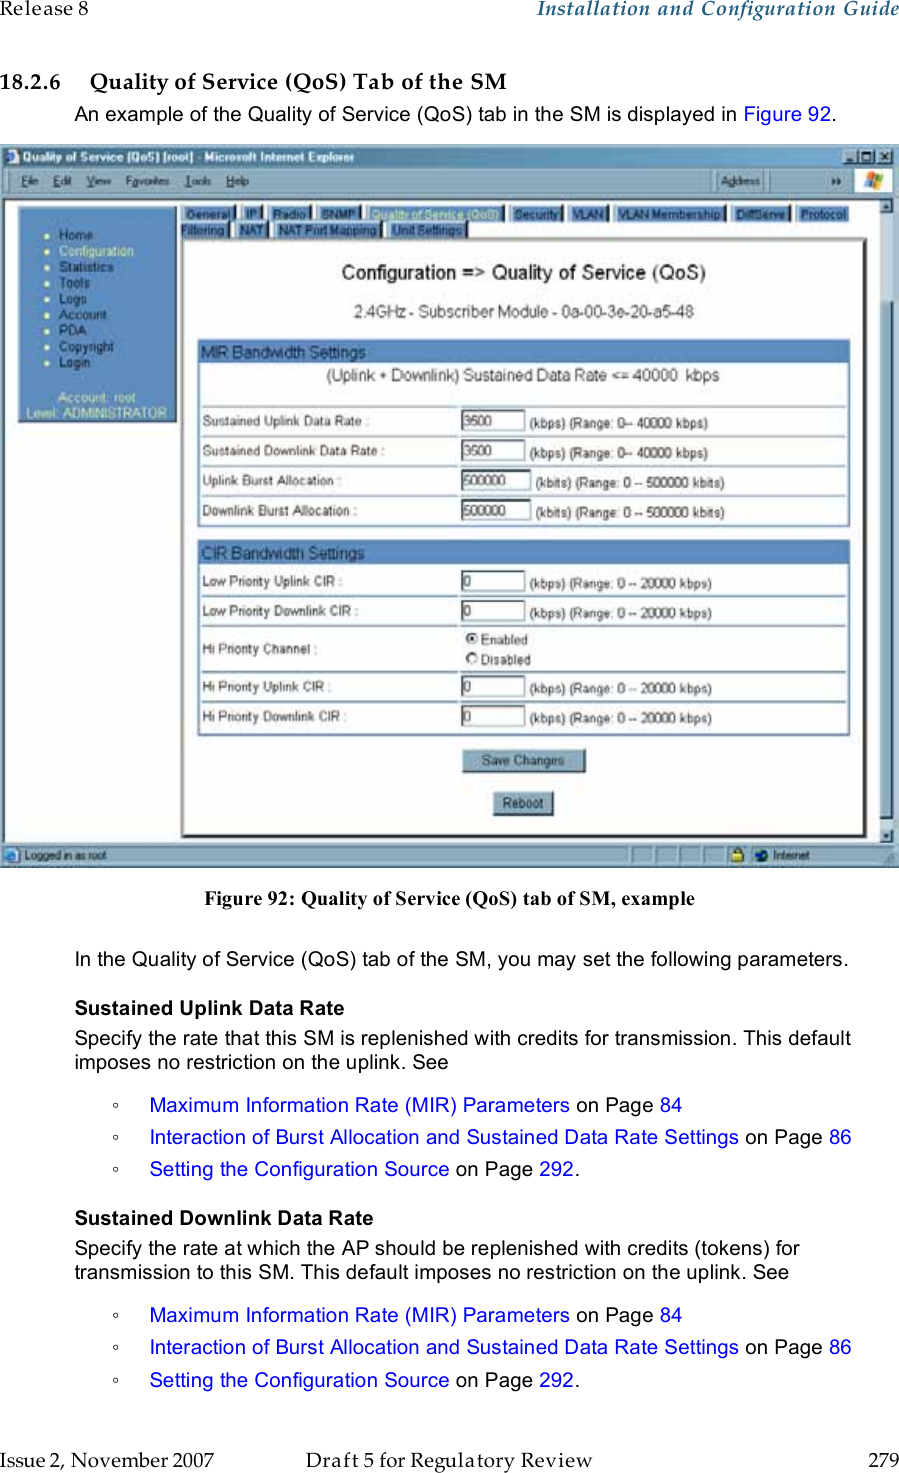 Release 8    Installation and Configuration Guide   Issue 2, November 2007  Draft 5 for Regulatory Review  279     18.2.6 Quality of Service (QoS) Tab of the SM An example of the Quality of Service (QoS) tab in the SM is displayed in Figure 92.  Figure 92: Quality of Service (QoS) tab of SM, example  In the Quality of Service (QoS) tab of the SM, you may set the following parameters. Sustained Uplink Data Rate Specify the rate that this SM is replenished with credits for transmission. This default imposes no restriction on the uplink. See  ◦ Maximum Information Rate (MIR) Parameters on Page 84 ◦ Interaction of Burst Allocation and Sustained Data Rate Settings on Page 86 ◦ Setting the Configuration Source on Page 292. Sustained Downlink Data Rate Specify the rate at which the AP should be replenished with credits (tokens) for transmission to this SM. This default imposes no restriction on the uplink. See  ◦ Maximum Information Rate (MIR) Parameters on Page 84 ◦ Interaction of Burst Allocation and Sustained Data Rate Settings on Page 86 ◦ Setting the Configuration Source on Page 292. 